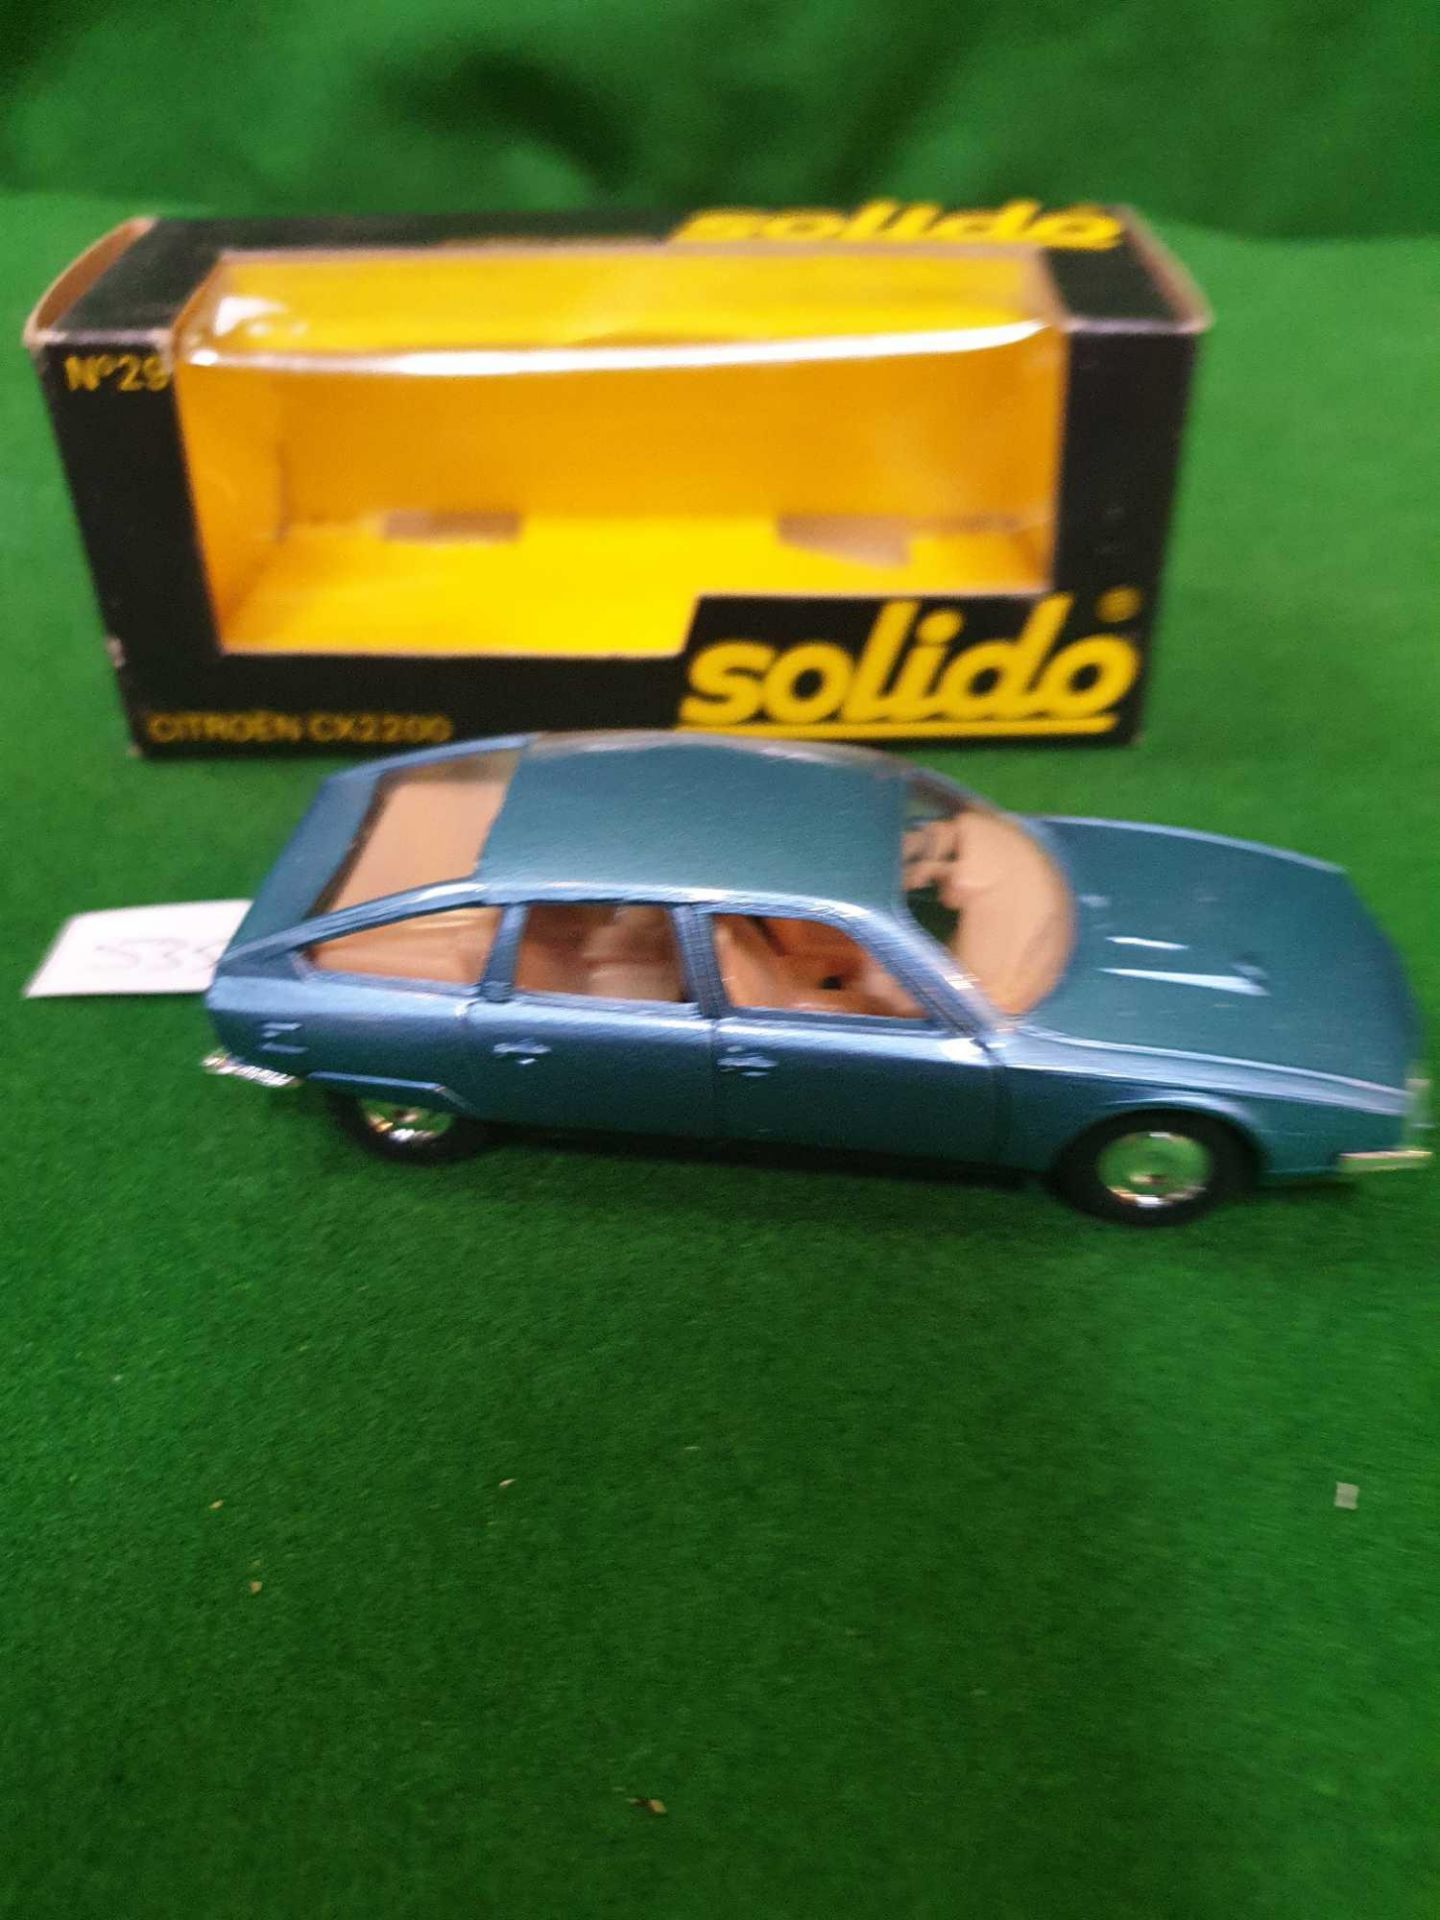 Solido #29 Citroen CX2200 Metallic Blue Virtually Mint To Mint Model In A Good Box - Image 2 of 4